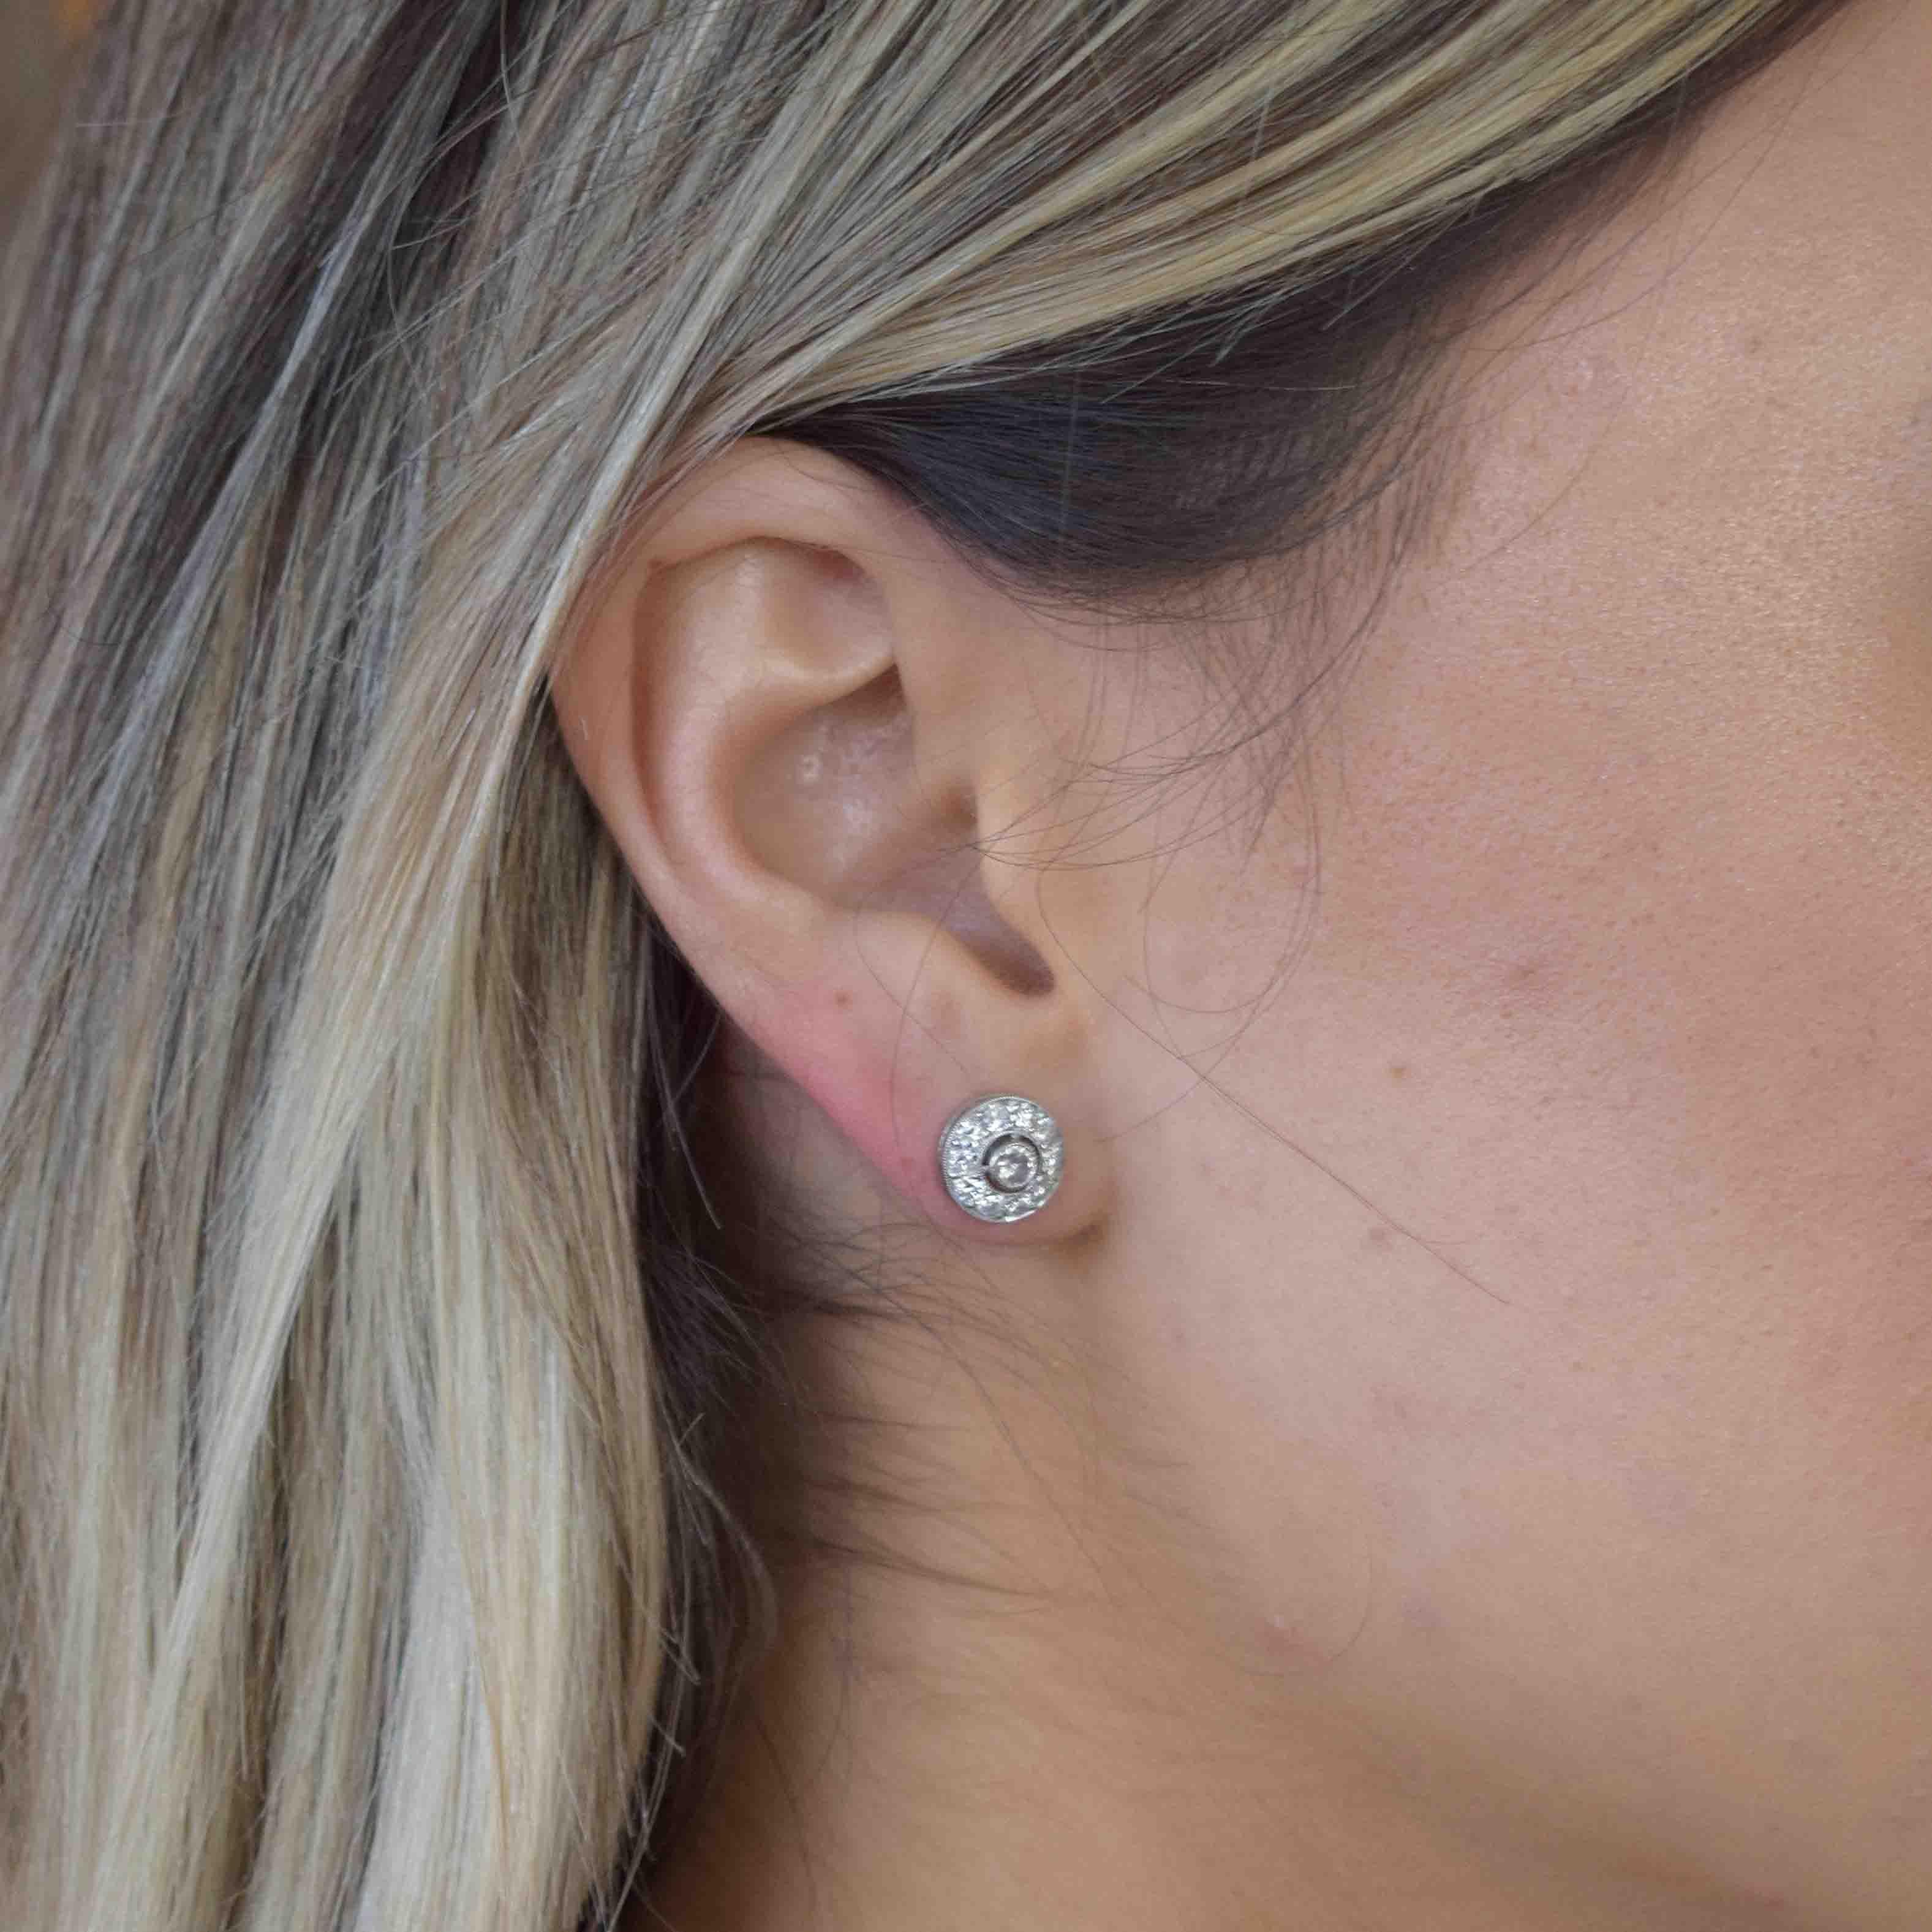 Diamond stud earrings can be worn anytime, anywhere. These stud earrings have the bonus feature of being surrounded by 10 round diamonds. Crafted in platinum.